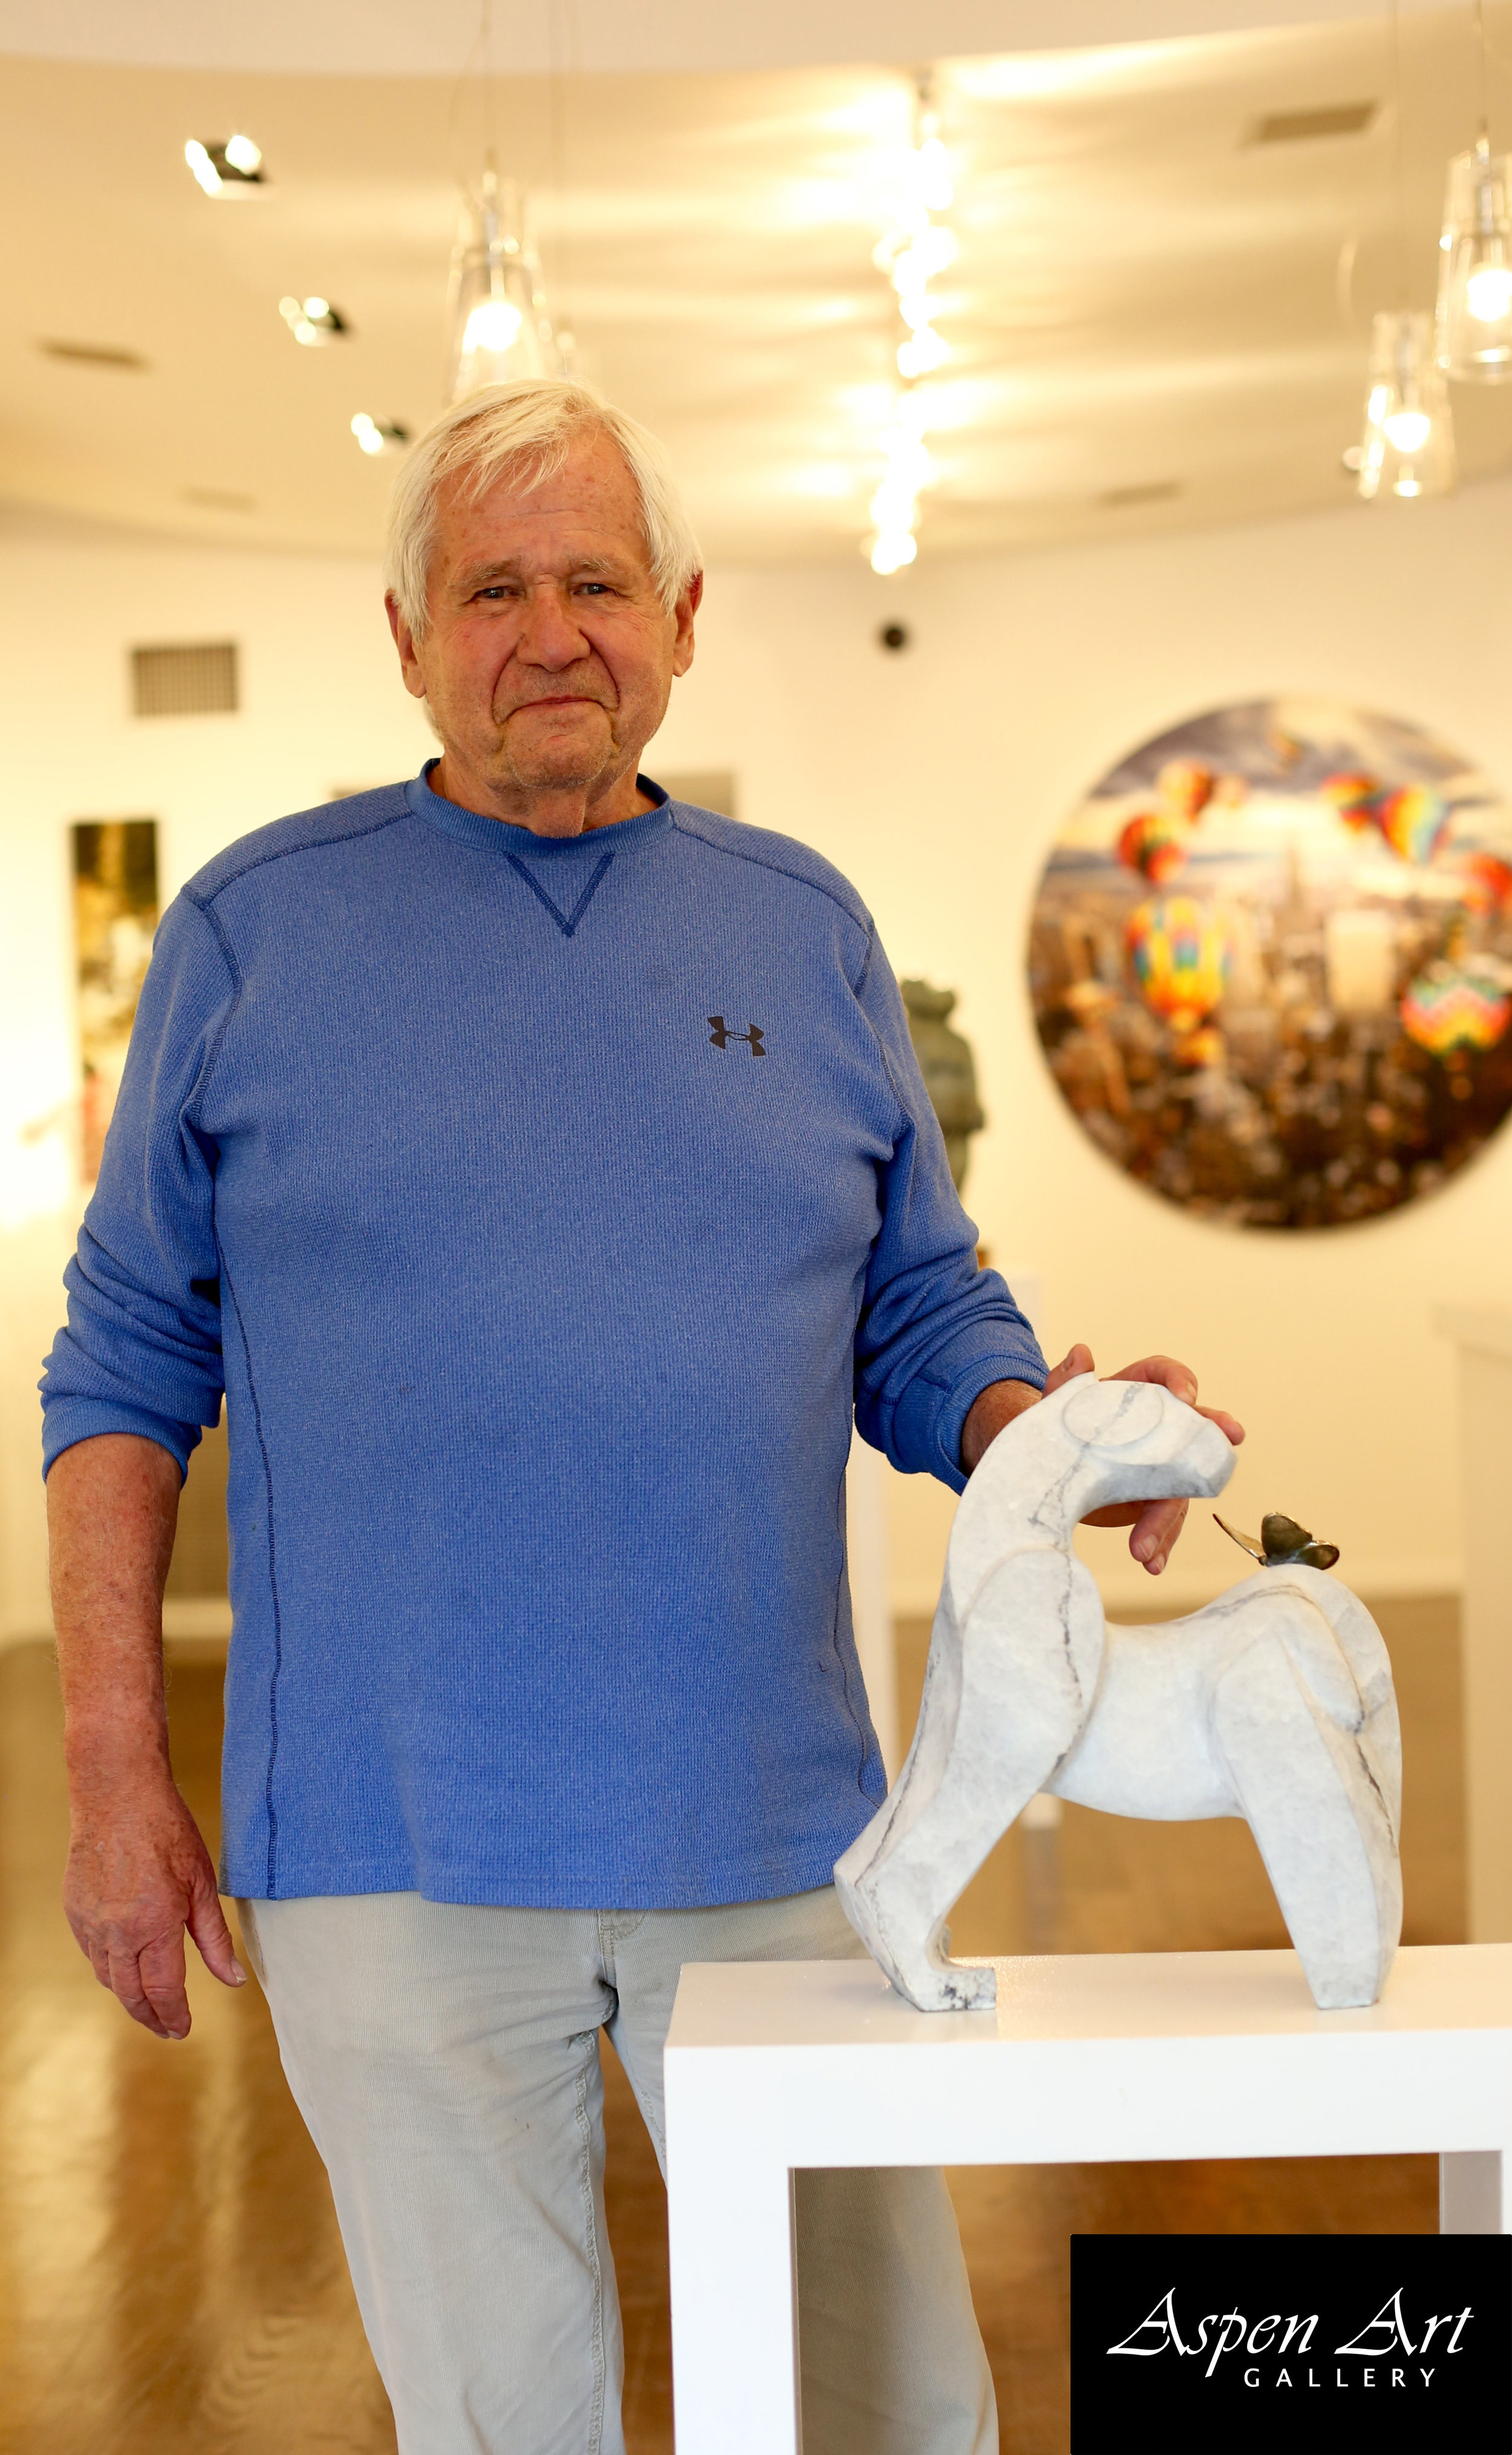 Mark Yale Harris during one of his visits at the Aspen Art Gallery